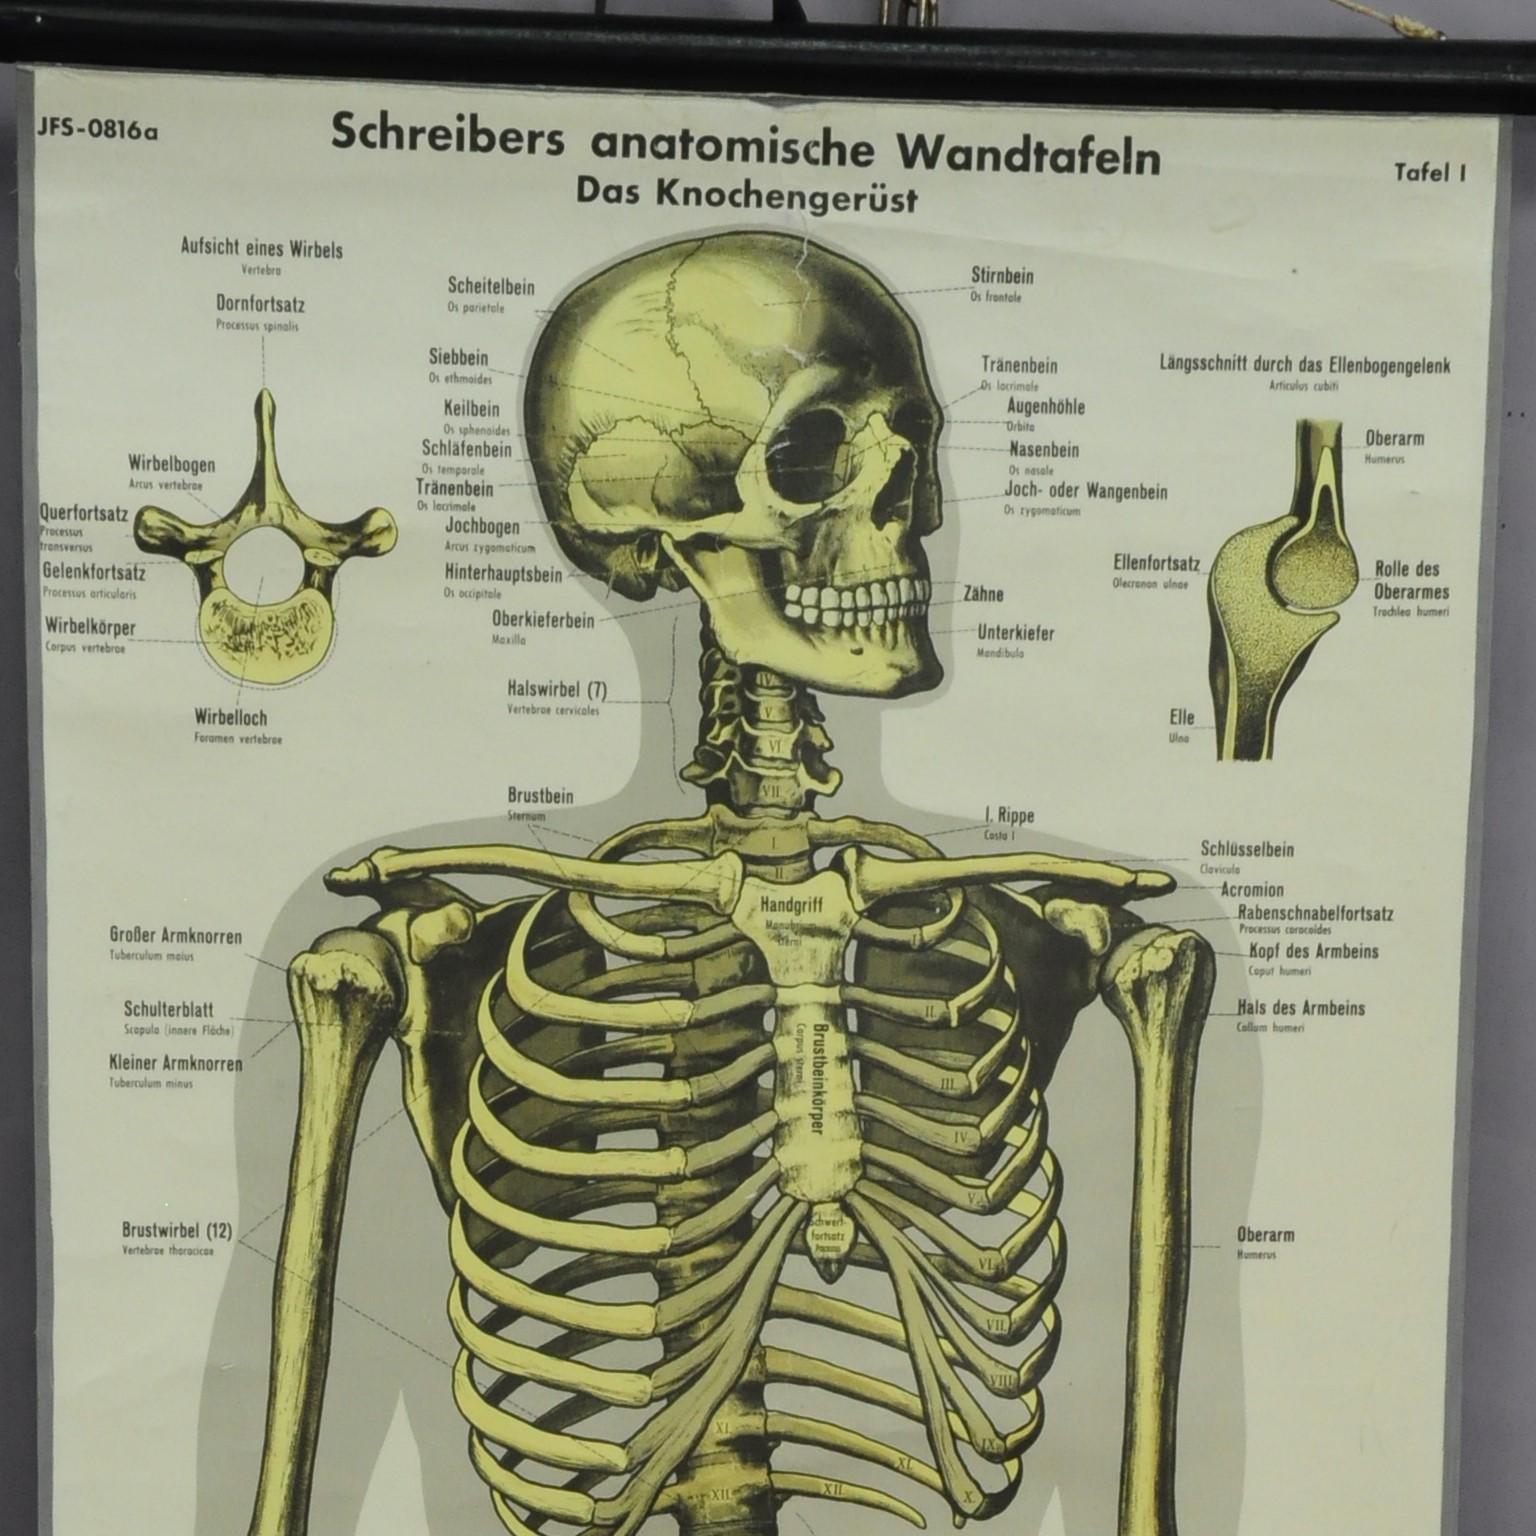 A great vintage anatomical pull-down wall chart illustrating the human skeleton. The individual bones are marked in German. Published first quarter of the 20th century by J. F. Schreiber, Graphic Art Design Esslingen. Used as teaching material in